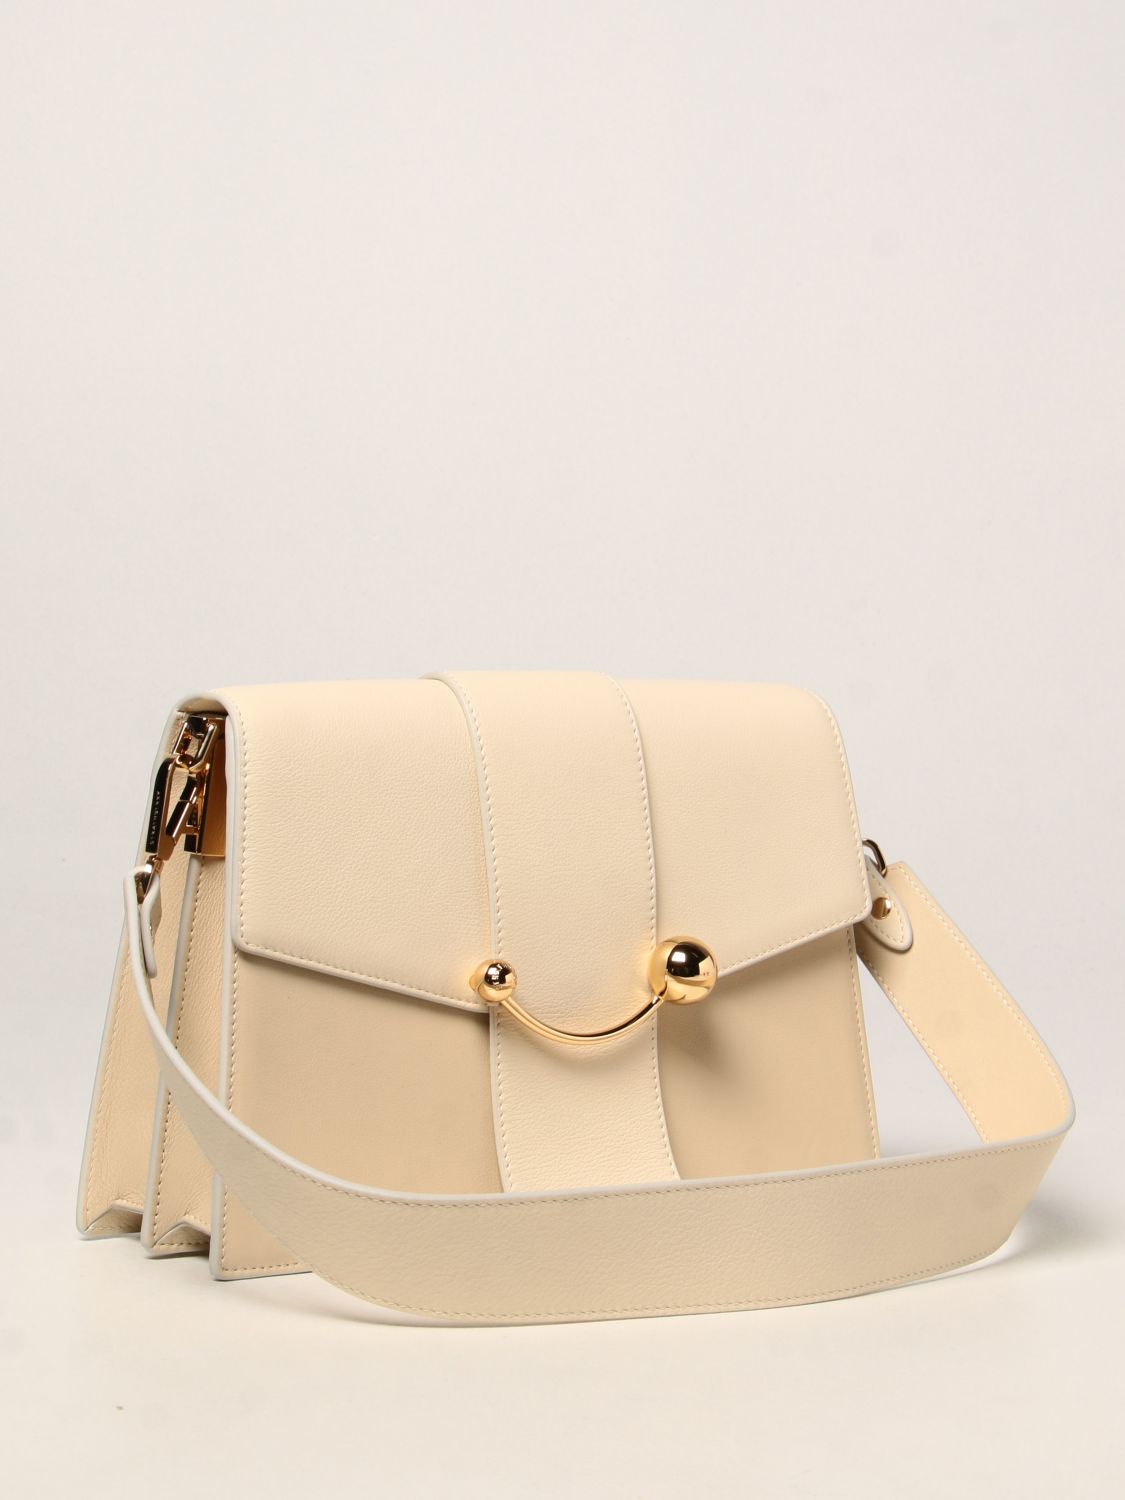 STRATHBERRY: Crescent leather bag - Yellow Cream  Strathberry shoulder bag  20204-250-560-950-w online at